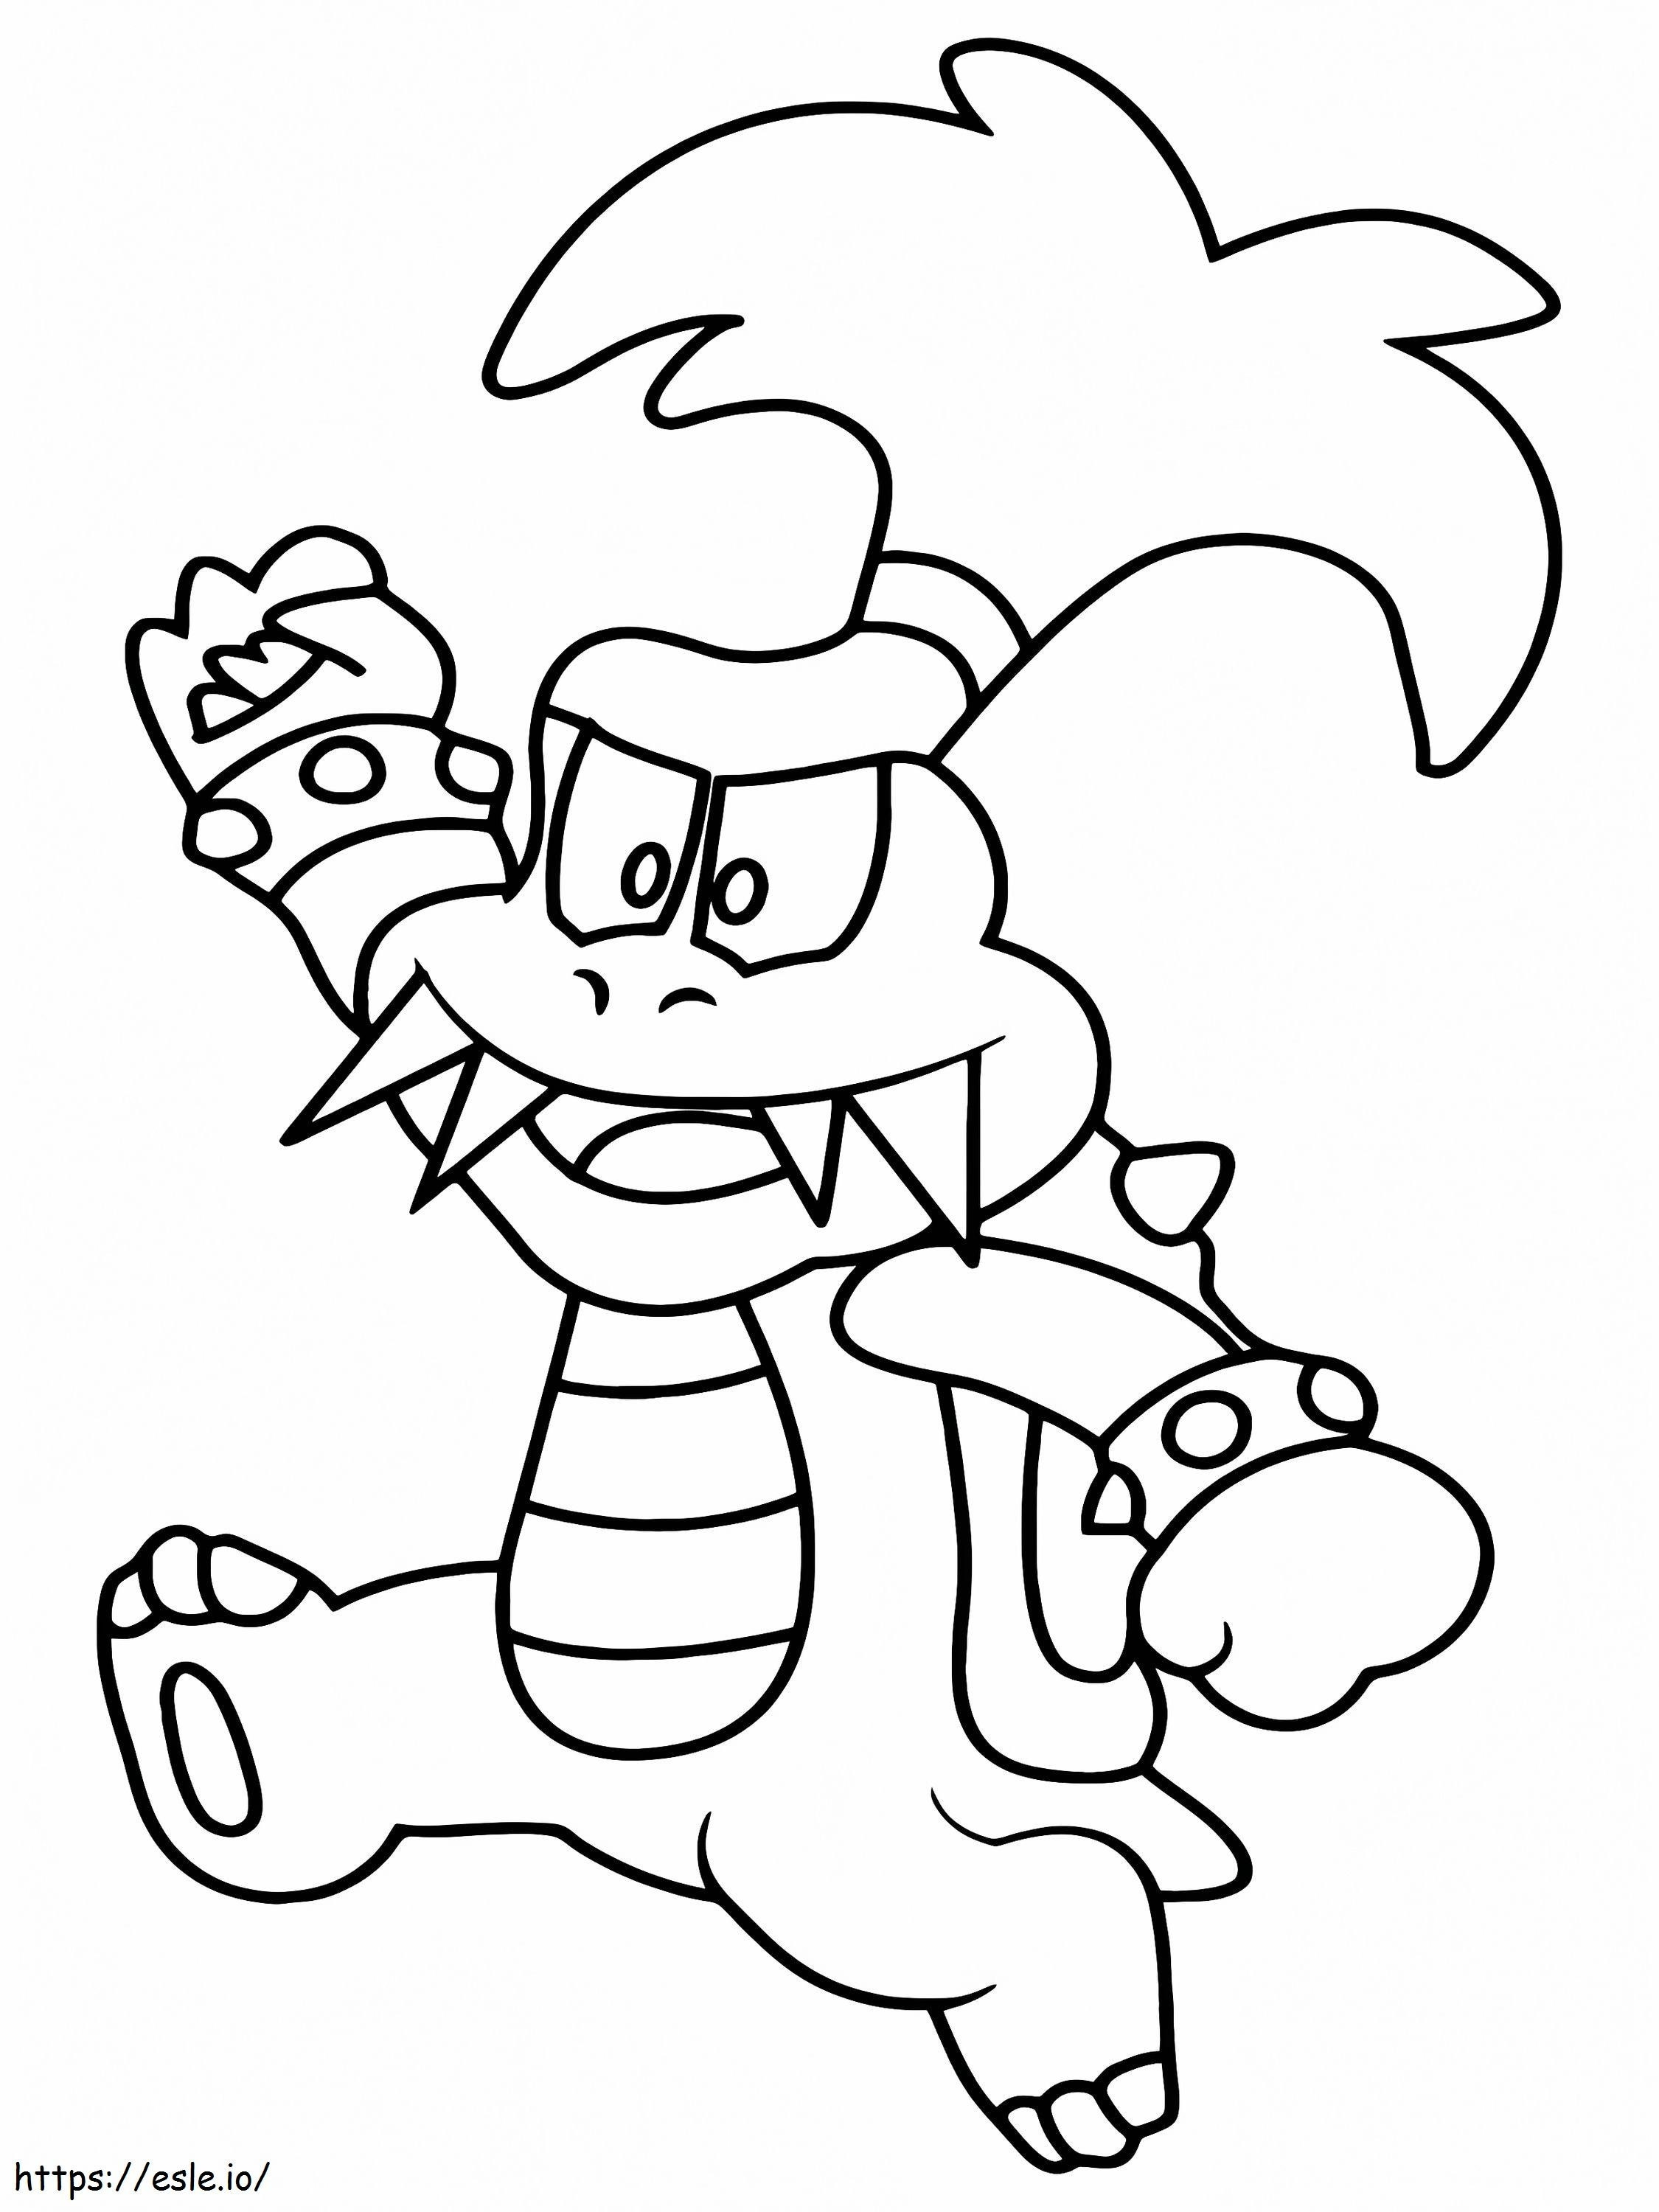 Innocent Baby Bowser coloring page